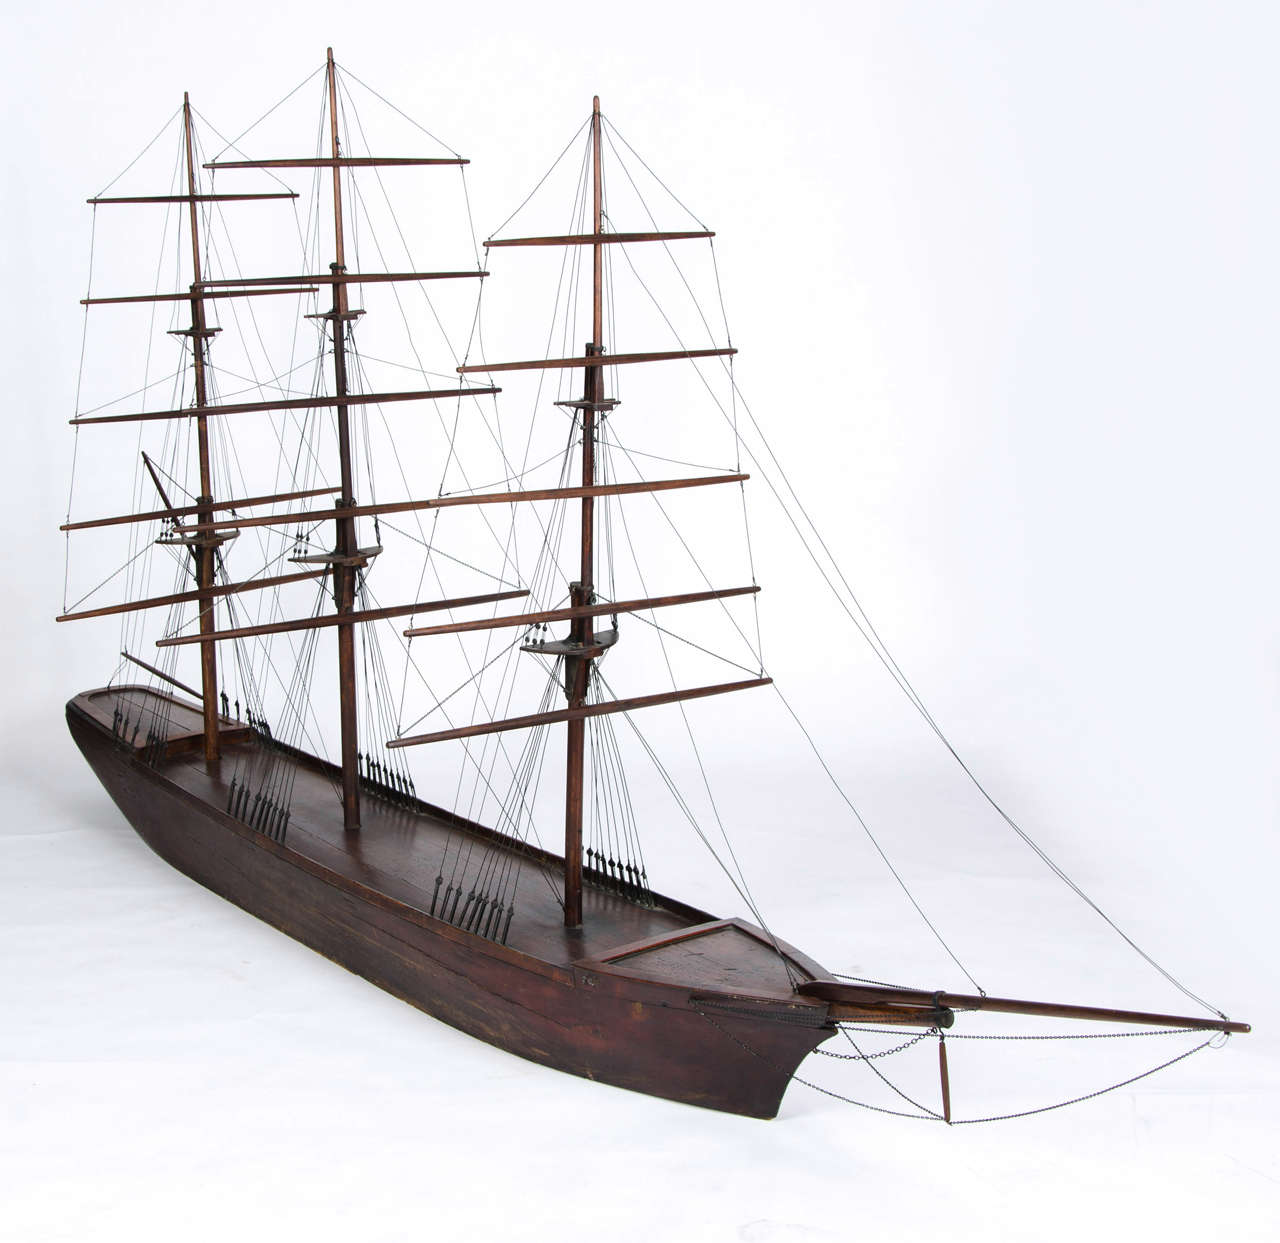 A rare large model of a three masted square rigged clipper with intricate rigging and solid flat bottomed hull.